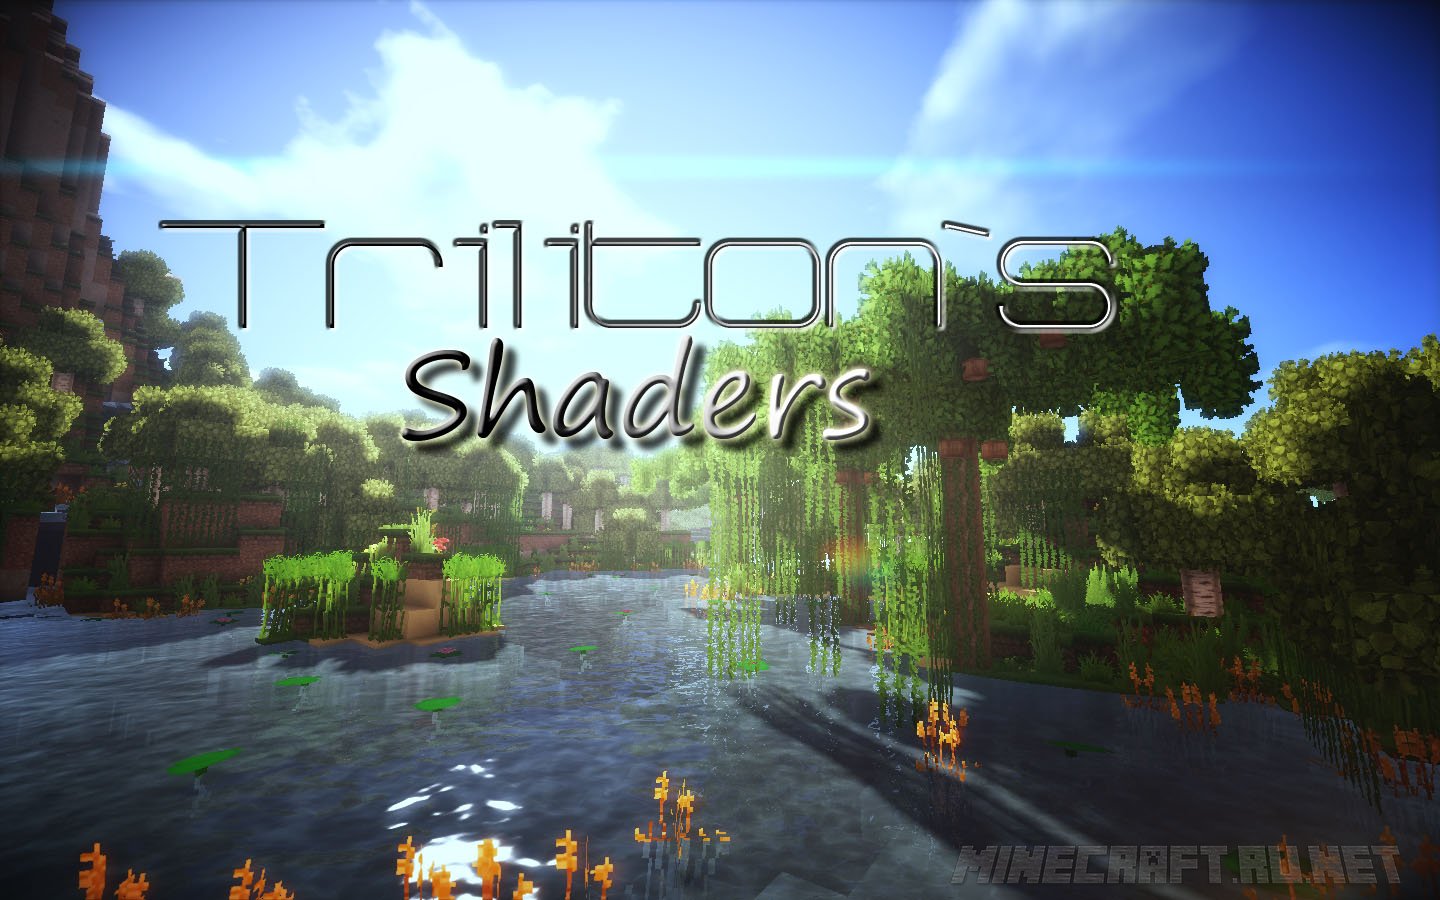 How to download shaders for minecraft windows 10 edition 1.15.1